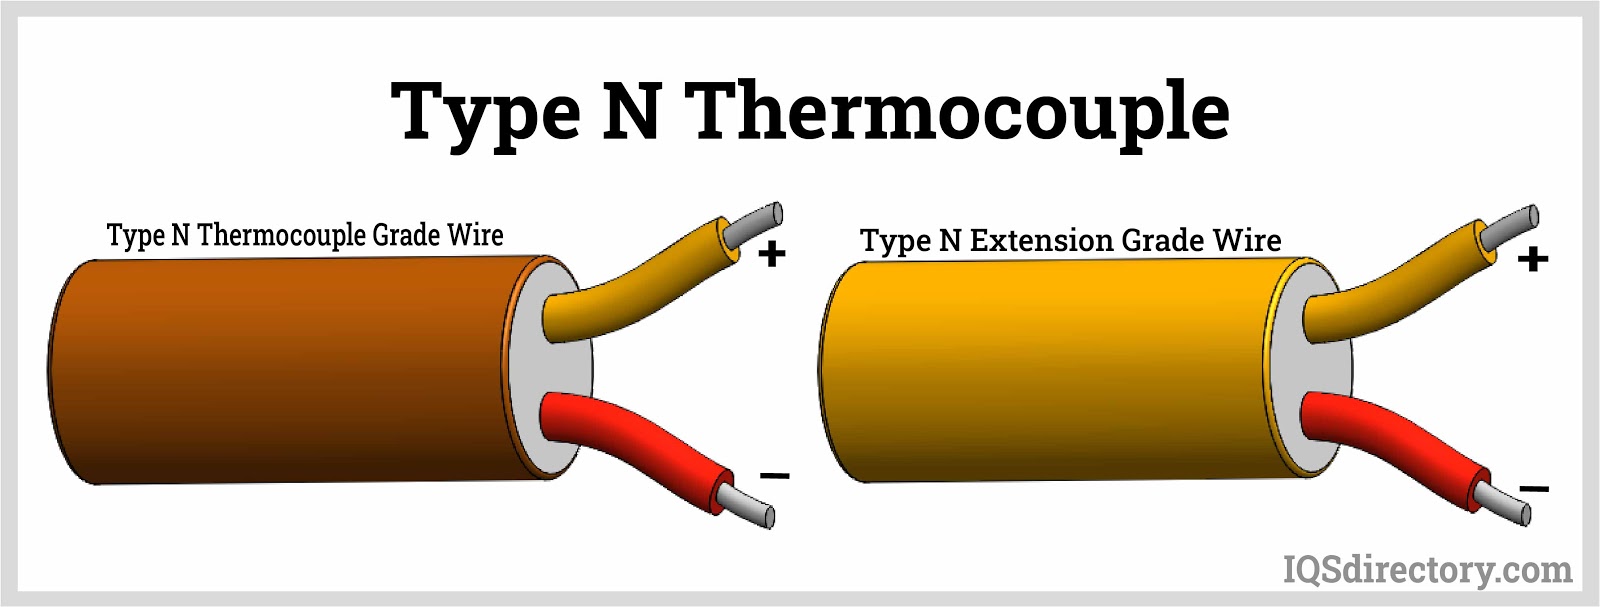 Type N Thermocouple